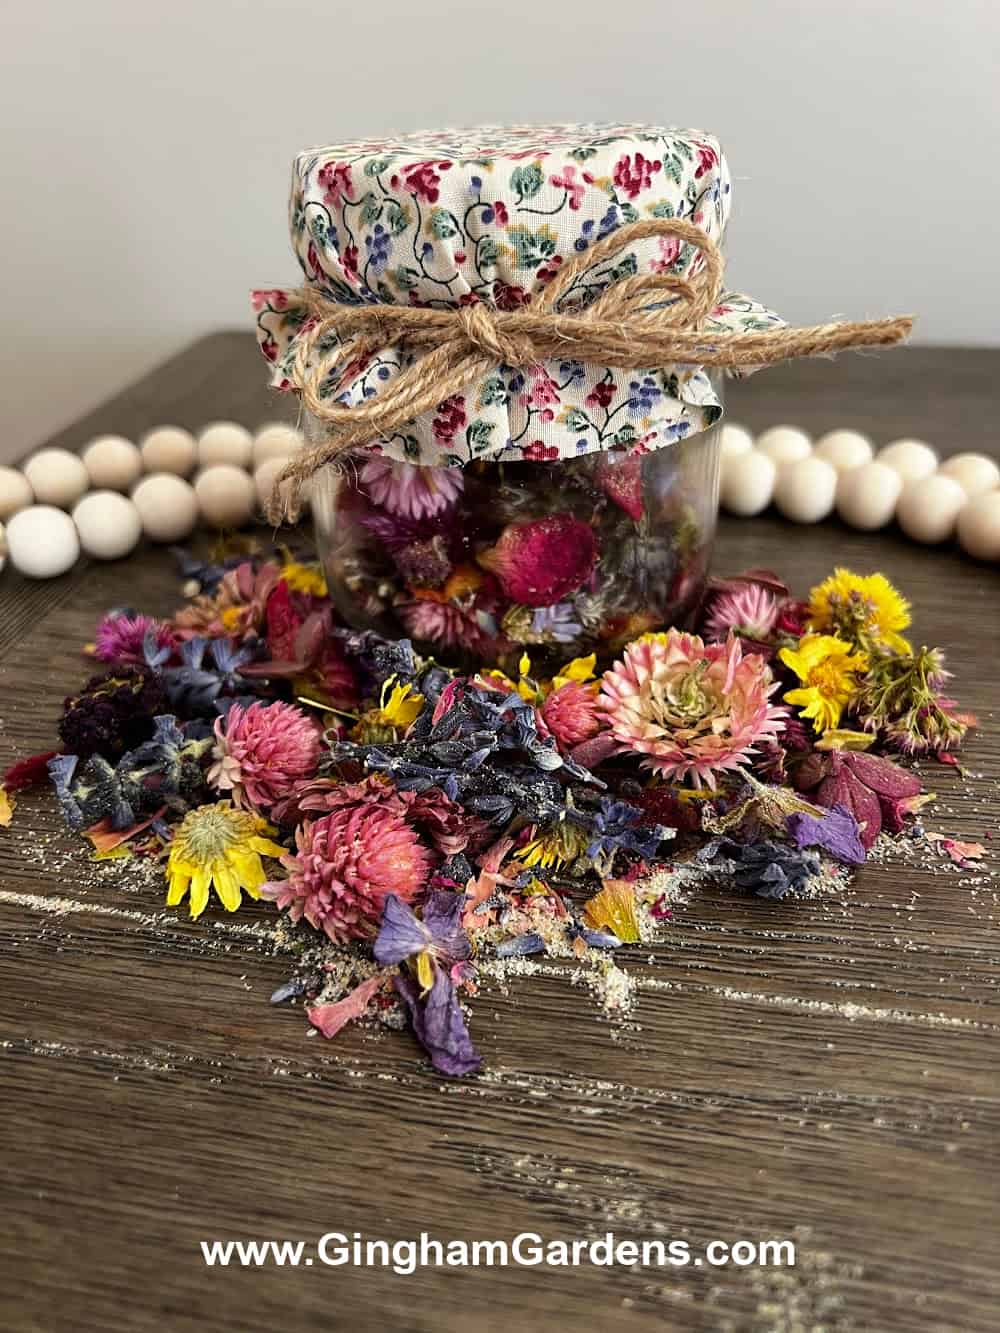 A jar of potpourri with a fabric cover tied with jute surrounded by colorful potpourri.